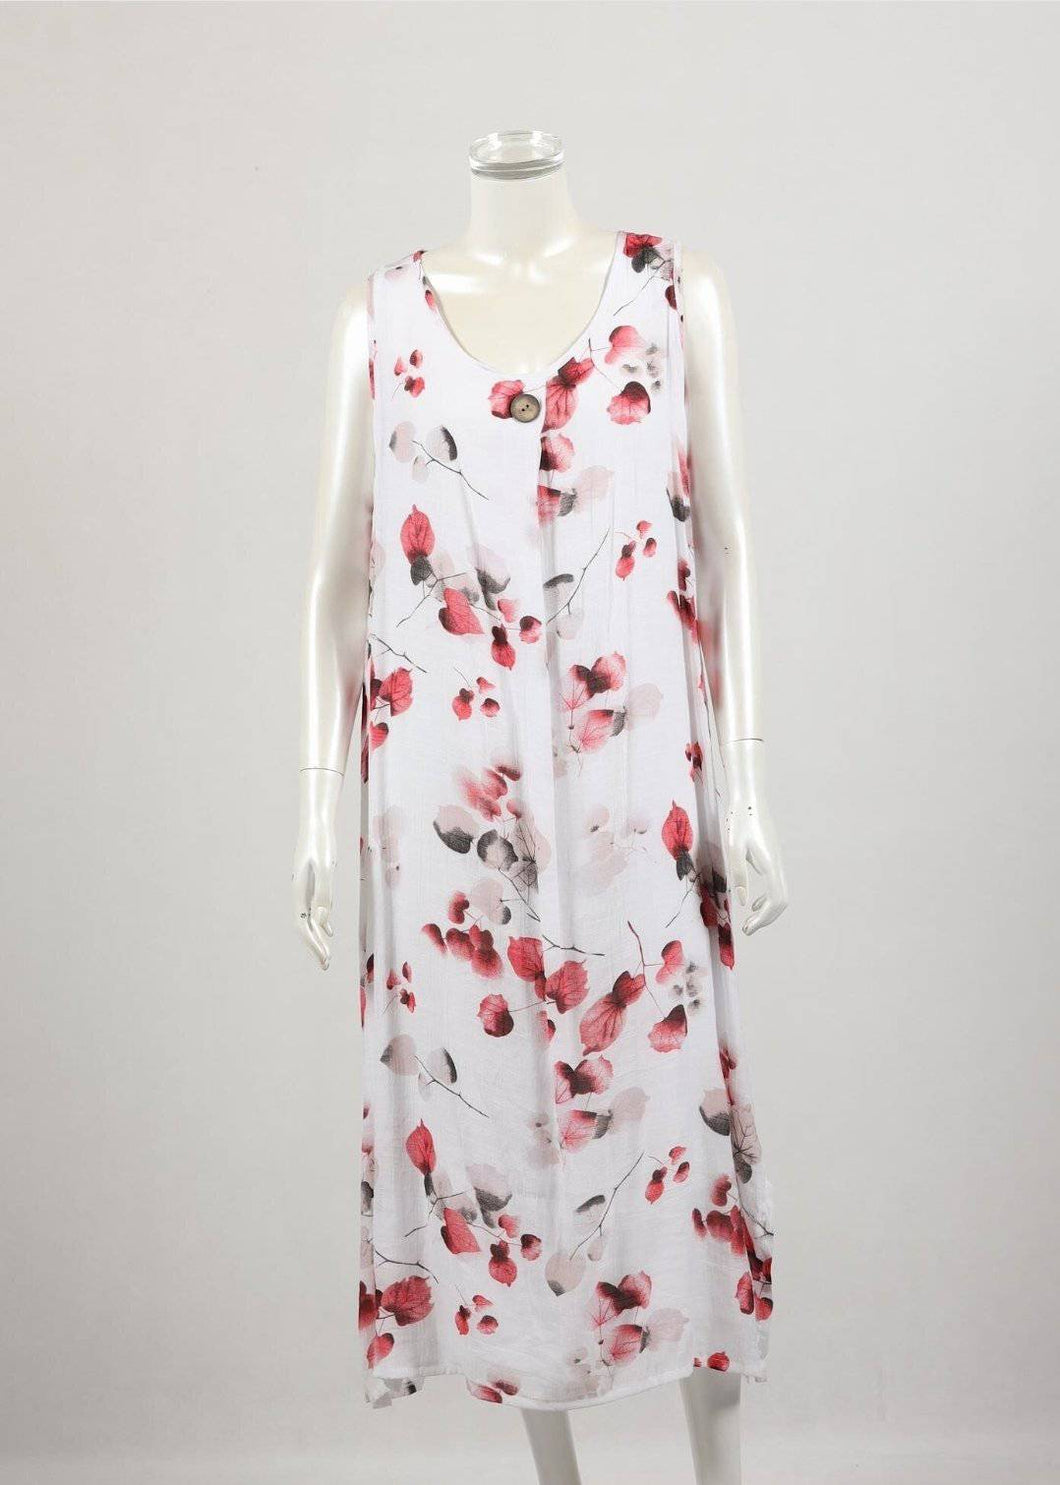 Dress Sleeveless Cotton Linen Reds and Pink Floral - Tracey Glynn Fashions